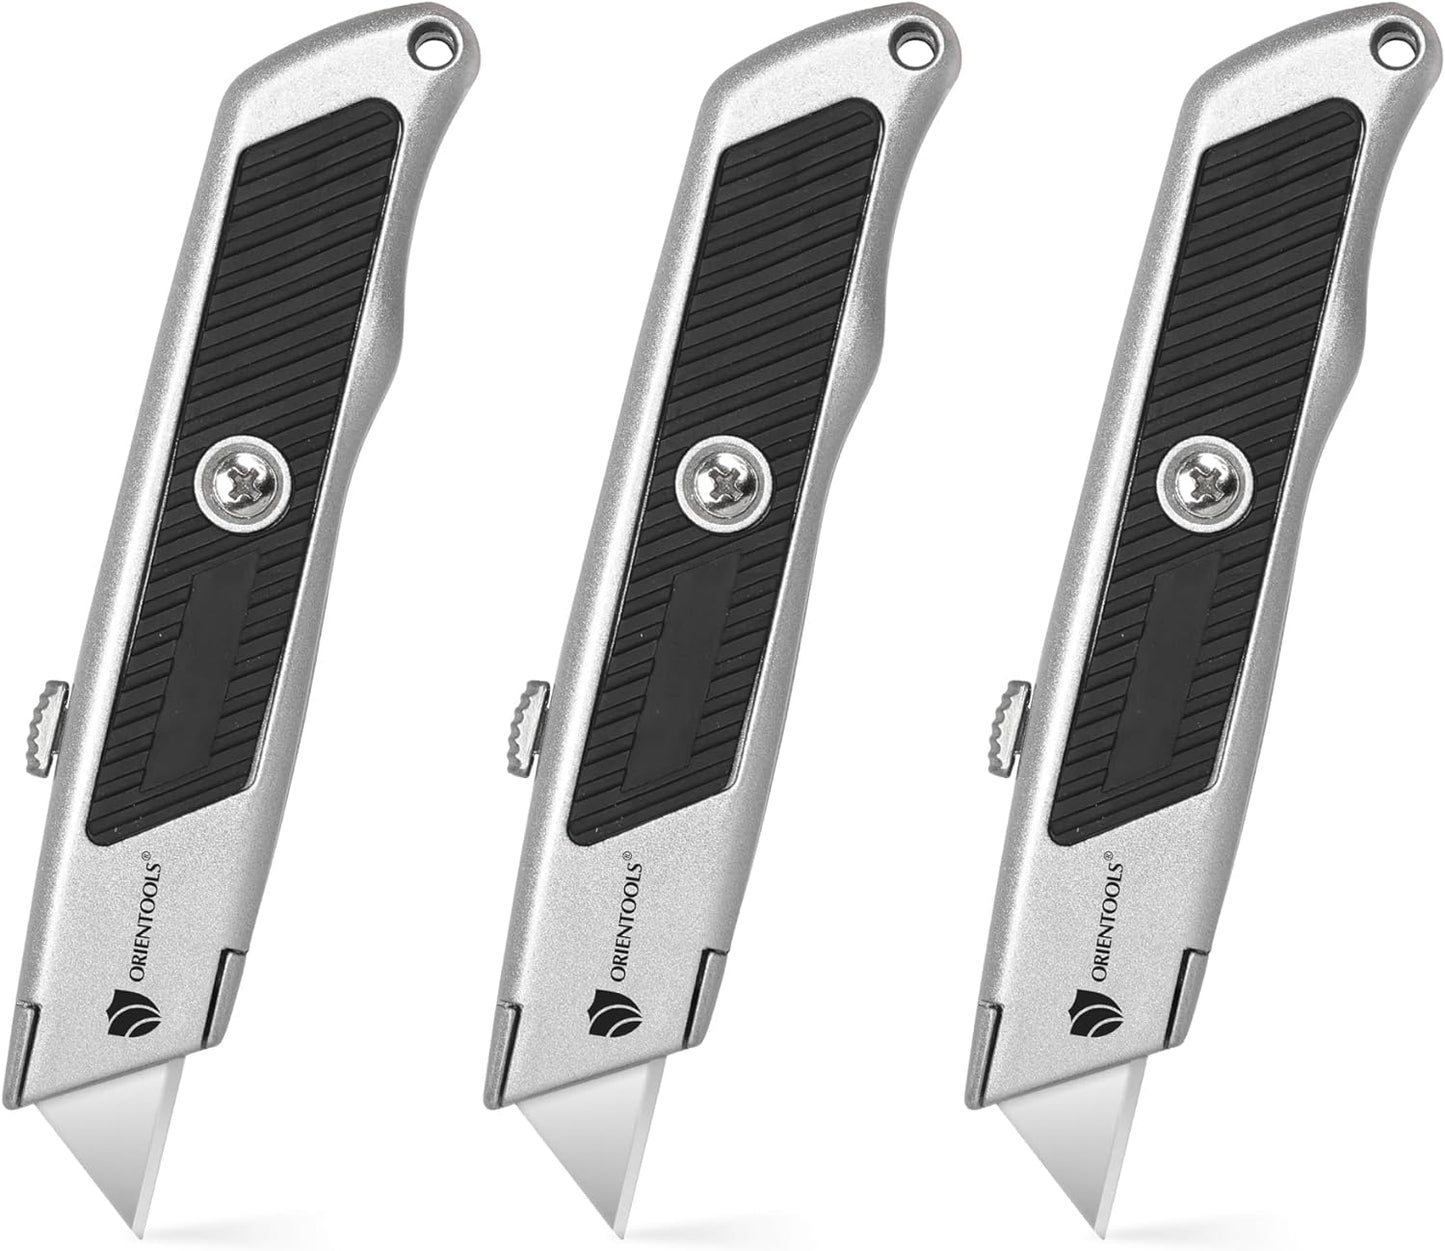 Utility Knife Safety Heavy Duty Box Cutter 3 Position Locking Blade Retractable 3-Pack Set